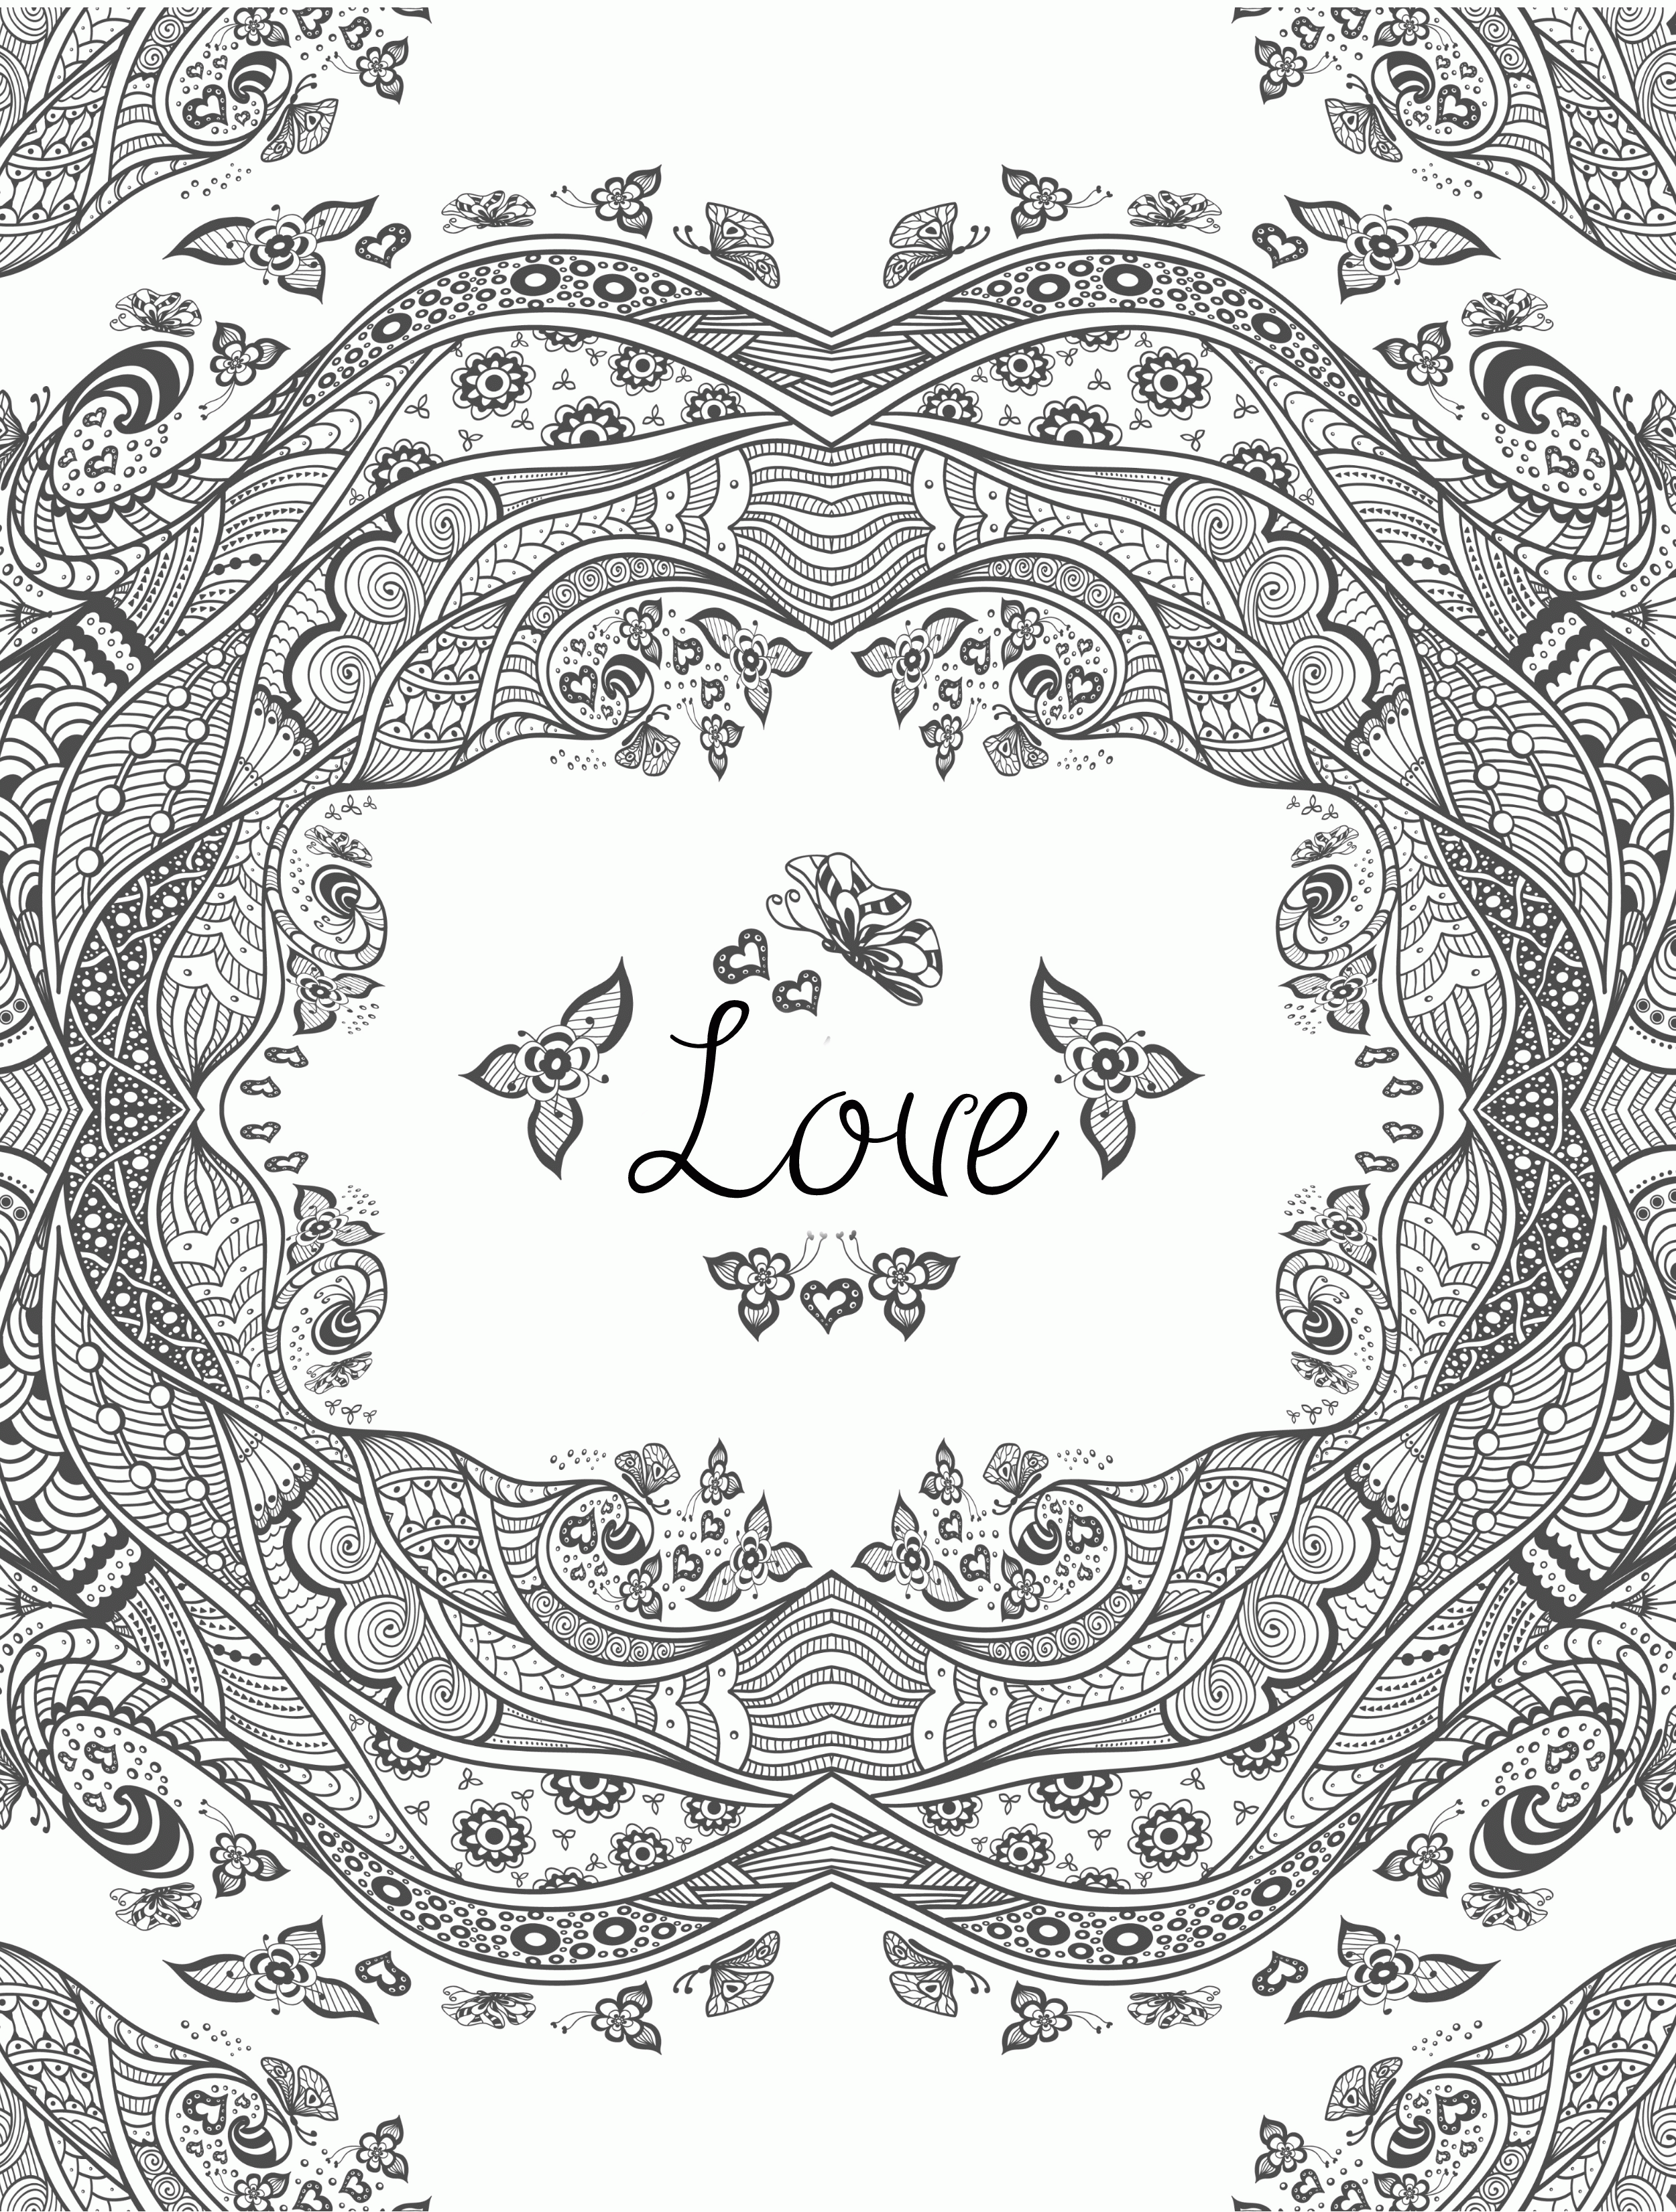 20 Free Printable Valentines Adult Coloring Pages - Page 3 of 20 ...